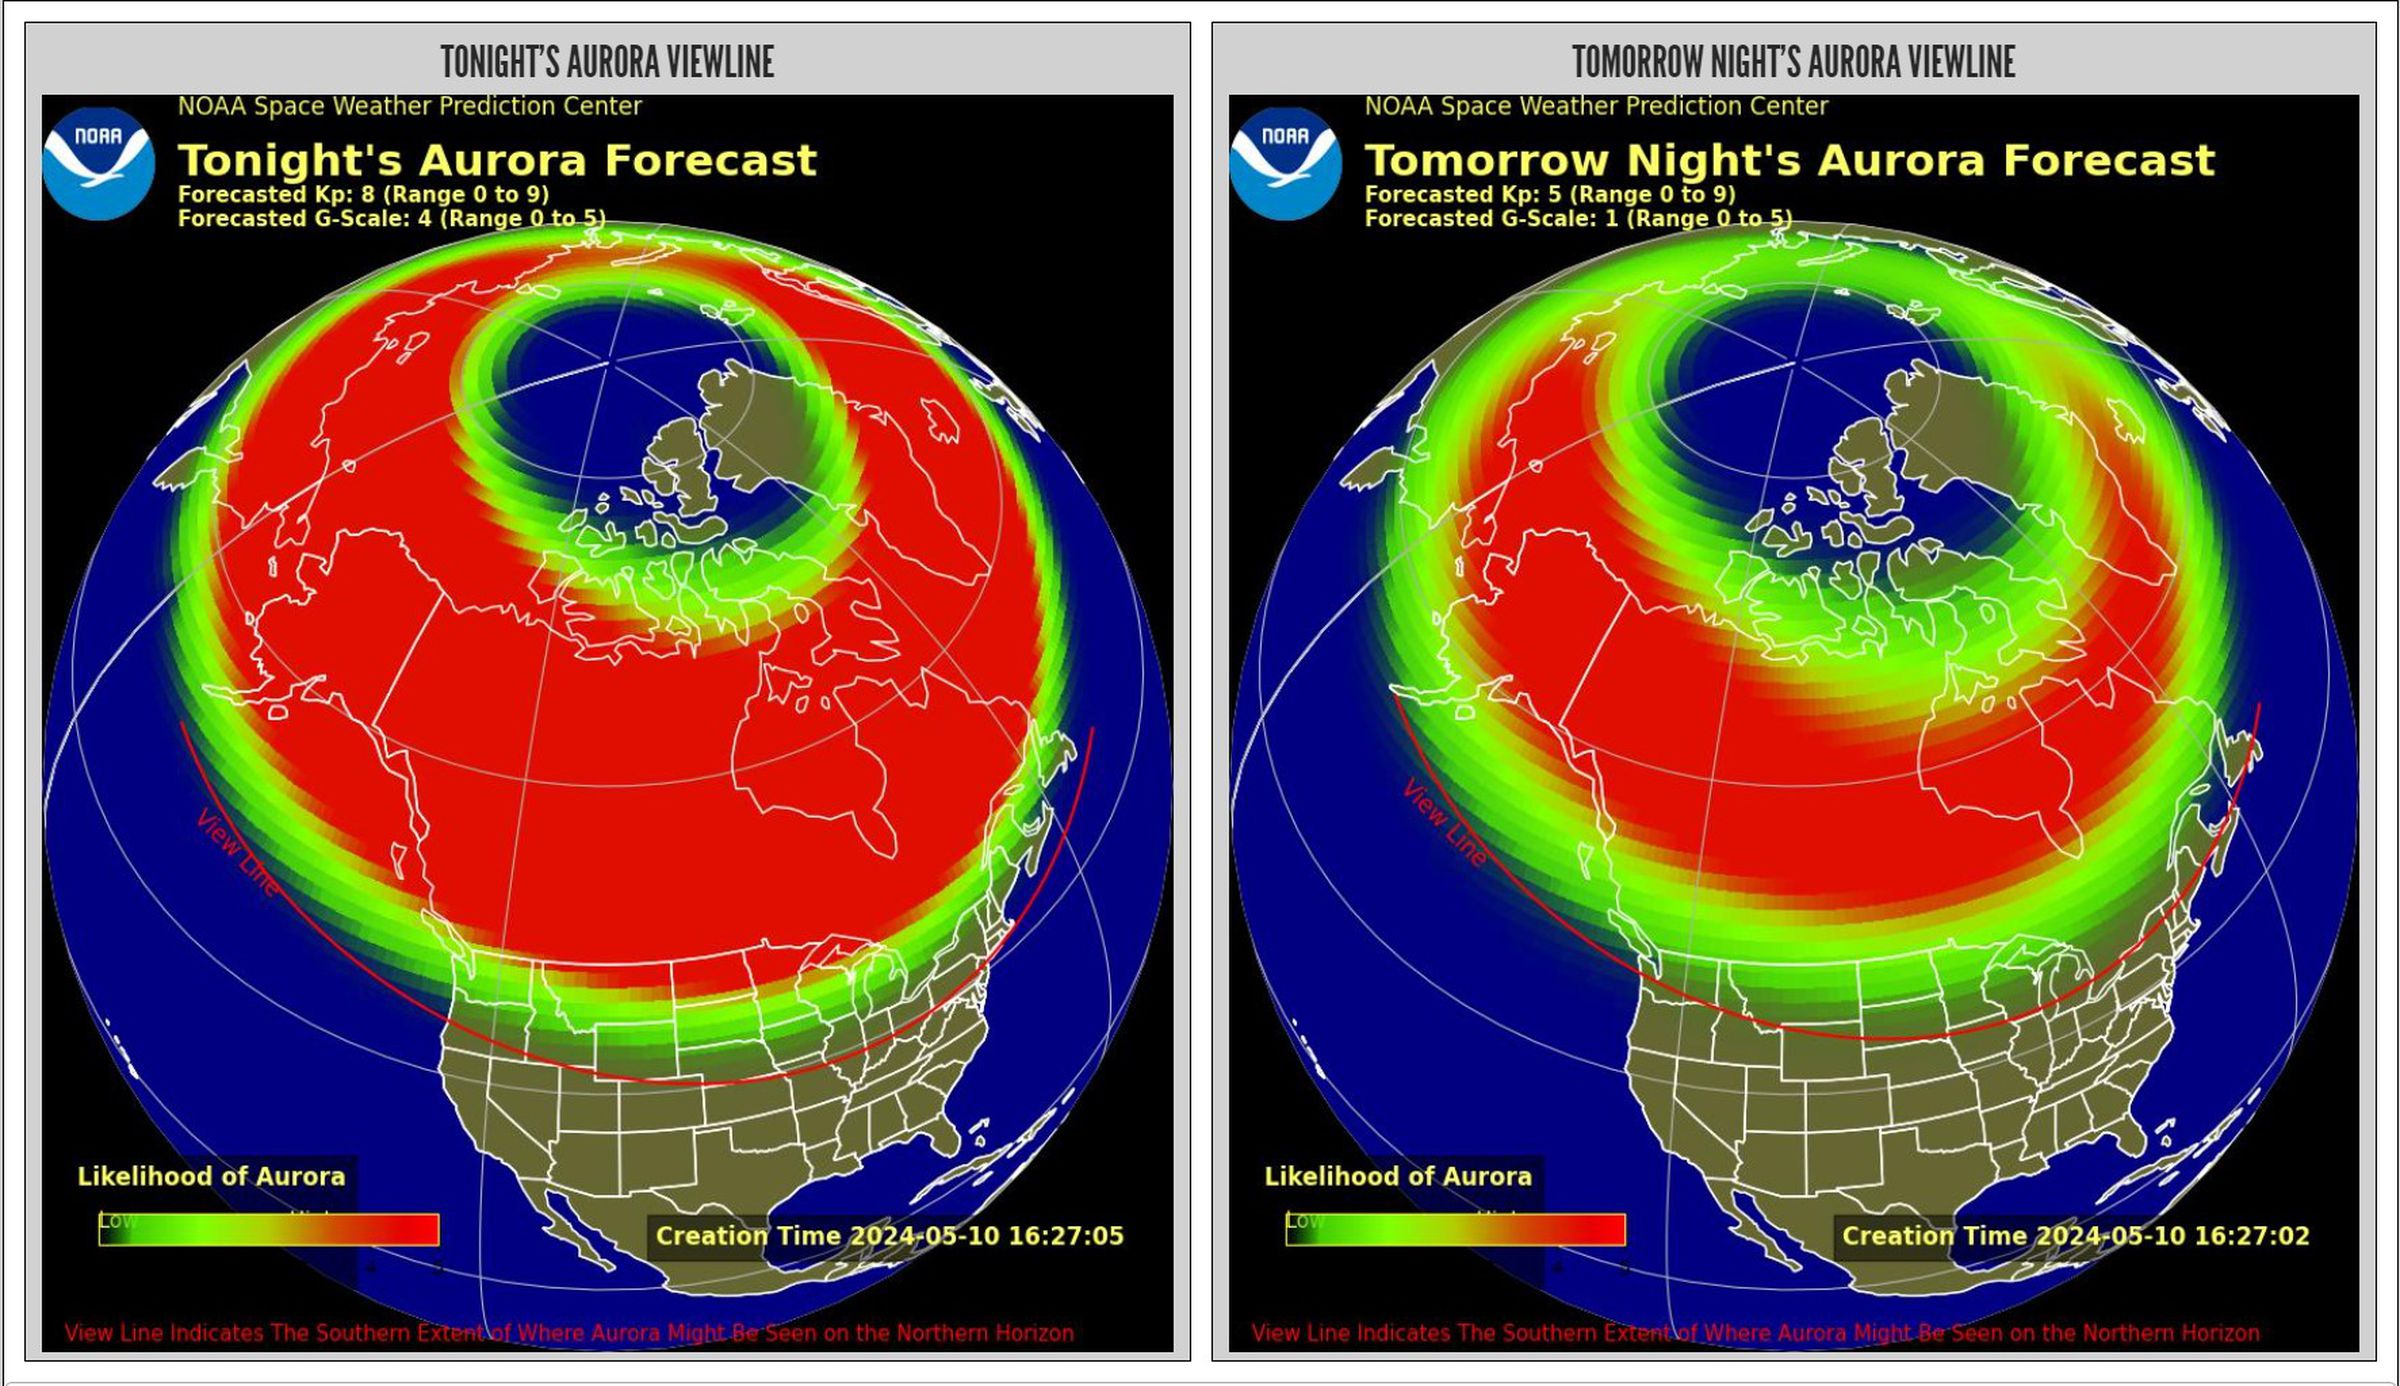 A screenshot showing the National Oceanic and Atmospheric Administration’s Aurora viewline predictions between May 10th-12th, 2024.